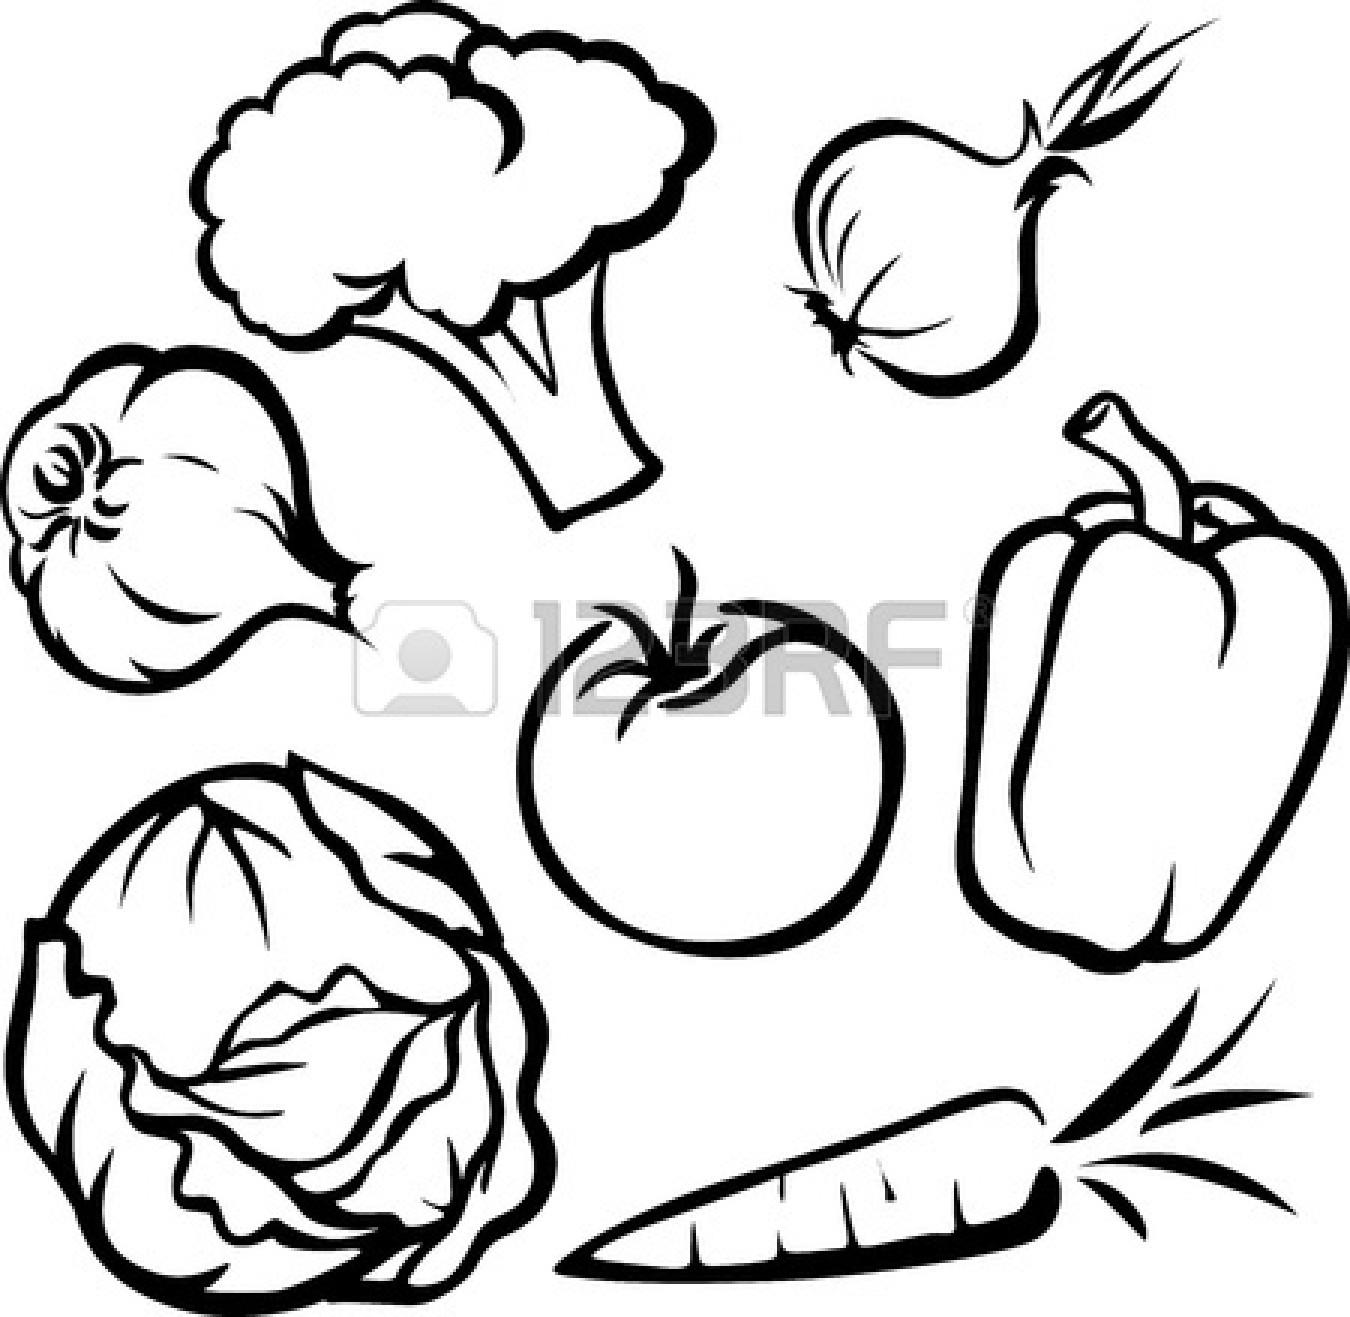 Fruit And Vegetable Clipart Black And White